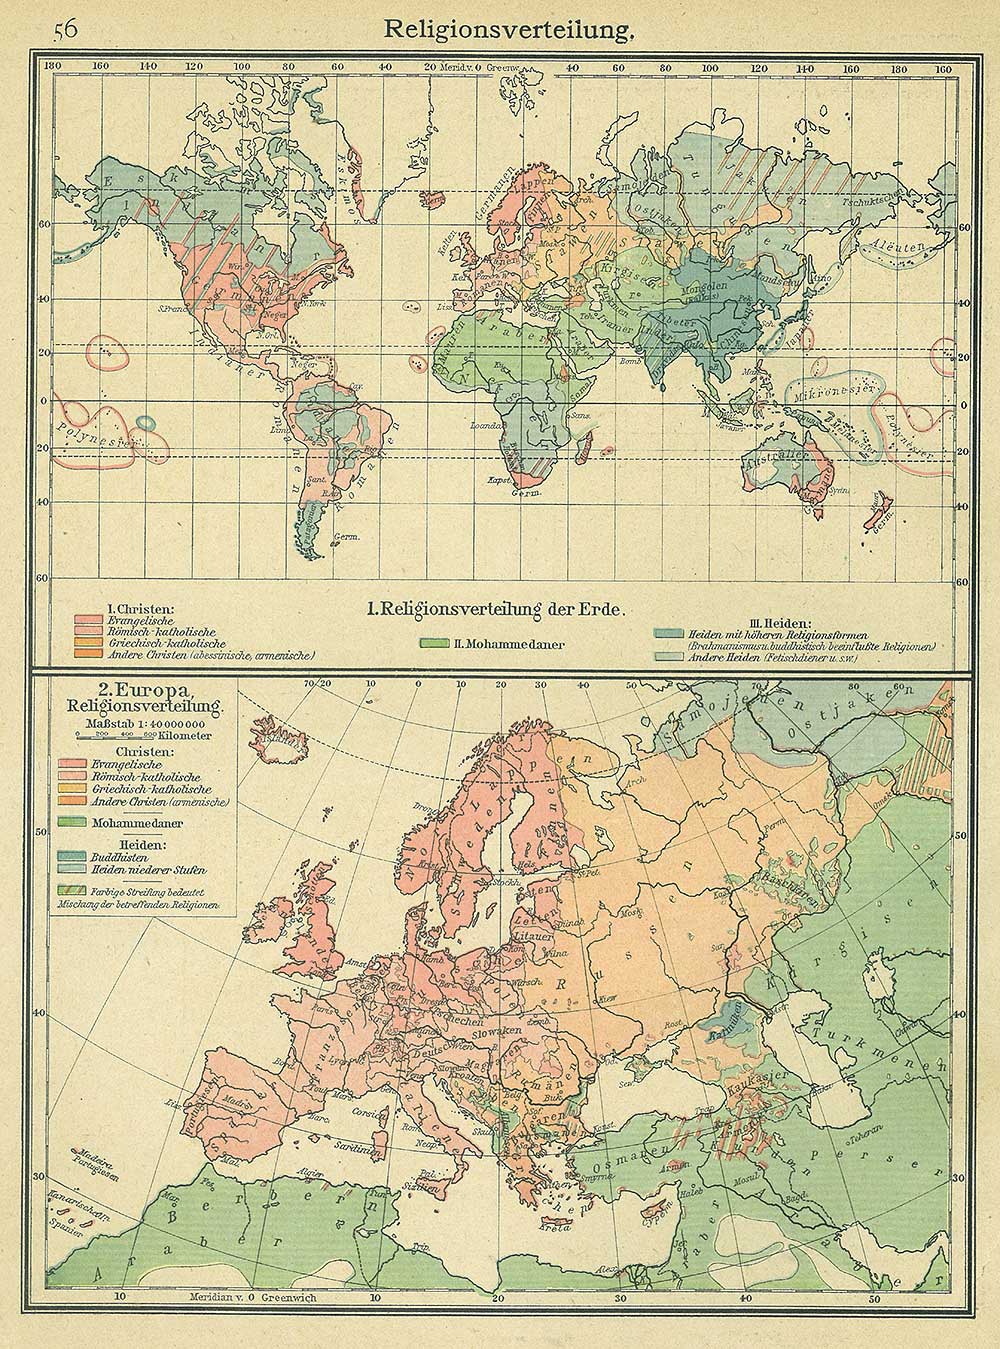 Distribution of religions map, Andrees 'Berliner Schul-Atlas', 1916, page 56, published size to print border 18.91cm wide by 25.71 cm high.